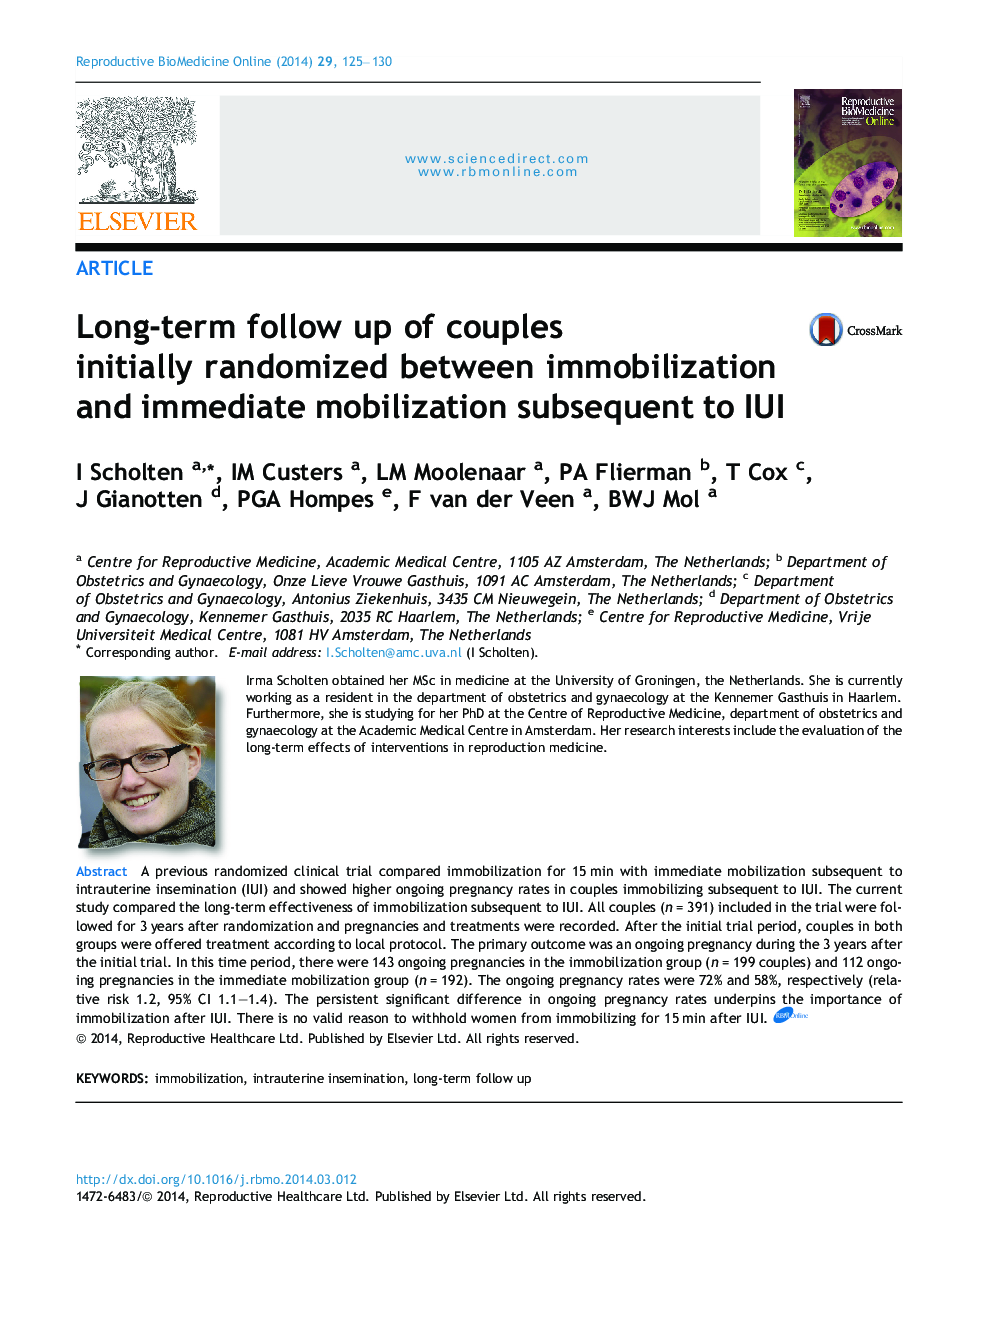 Long-term follow up of couples initially randomized between immobilization and immediate mobilization subsequent to IUI 